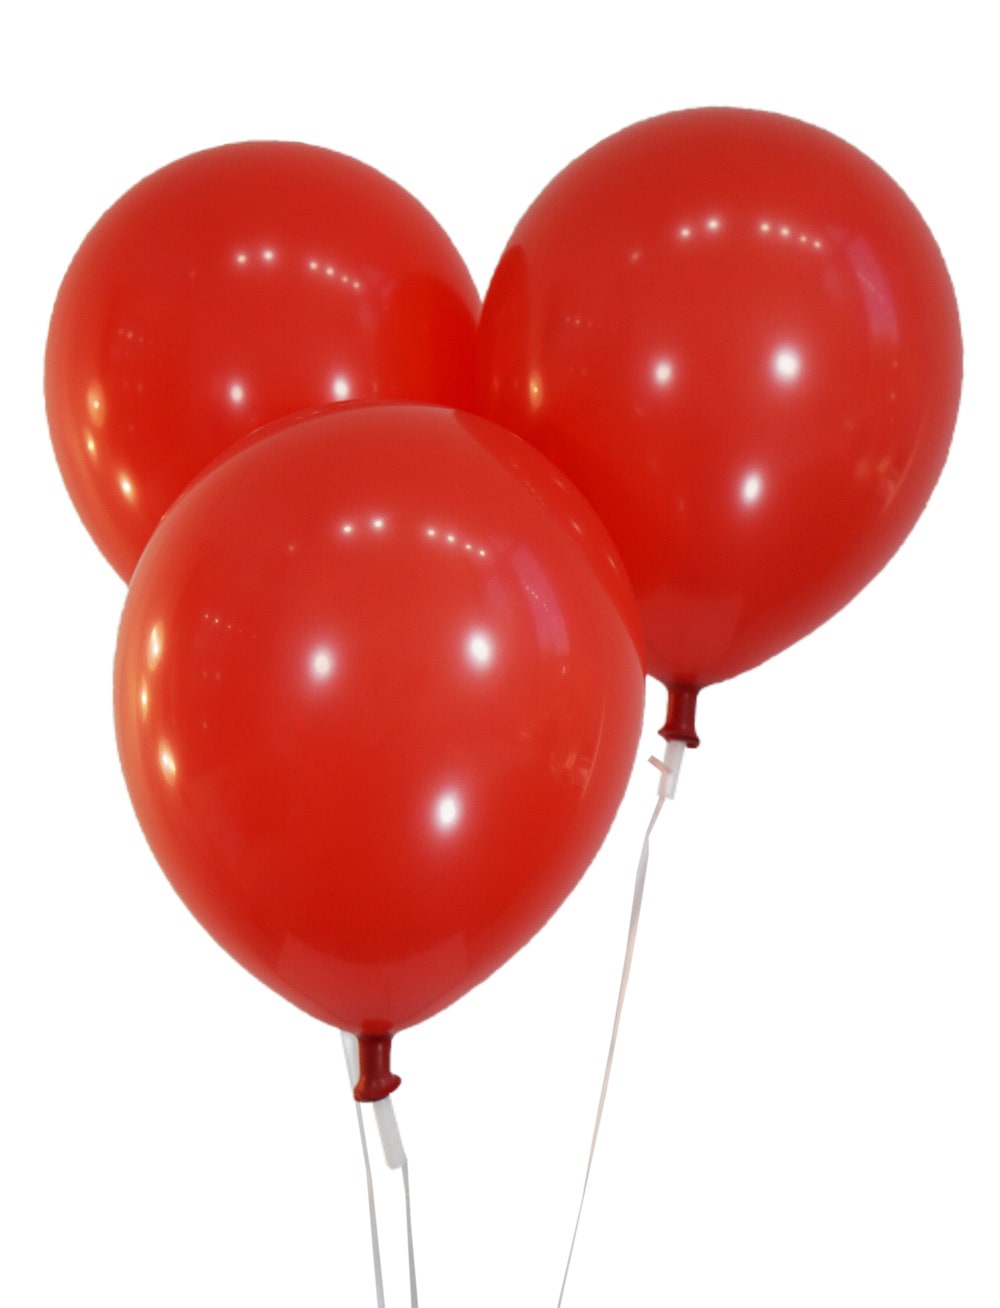 Latex Balloons - 3 latex balloons. Please specify color in the special instructions.